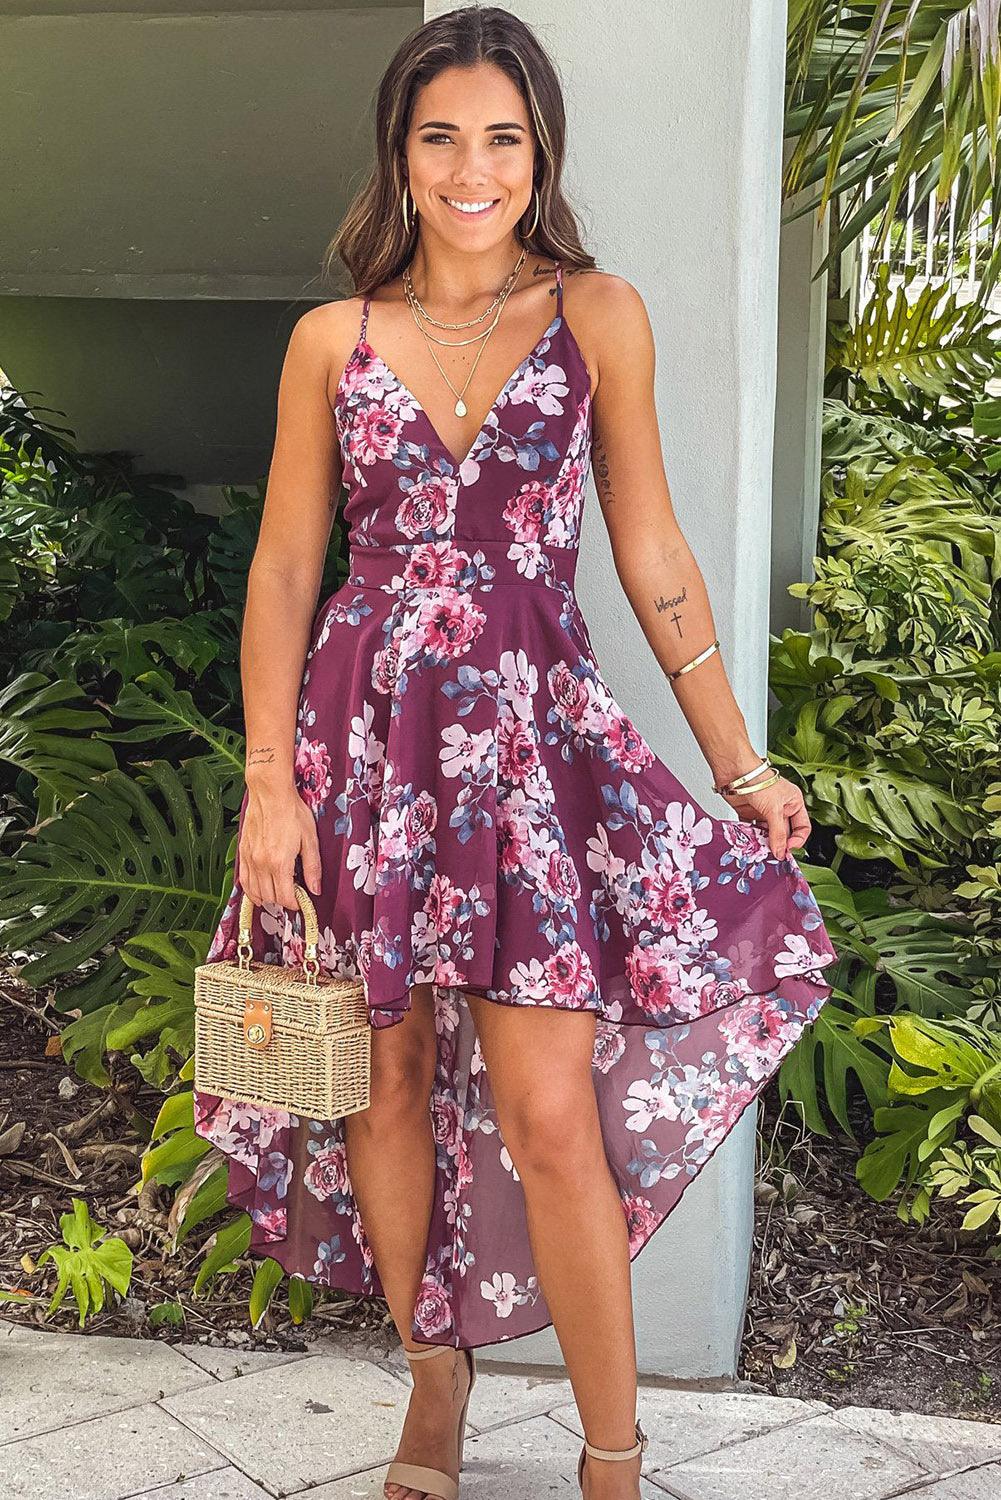 Burgundy Floral High-low Dress with Lace Back - L & M Kee, LLC